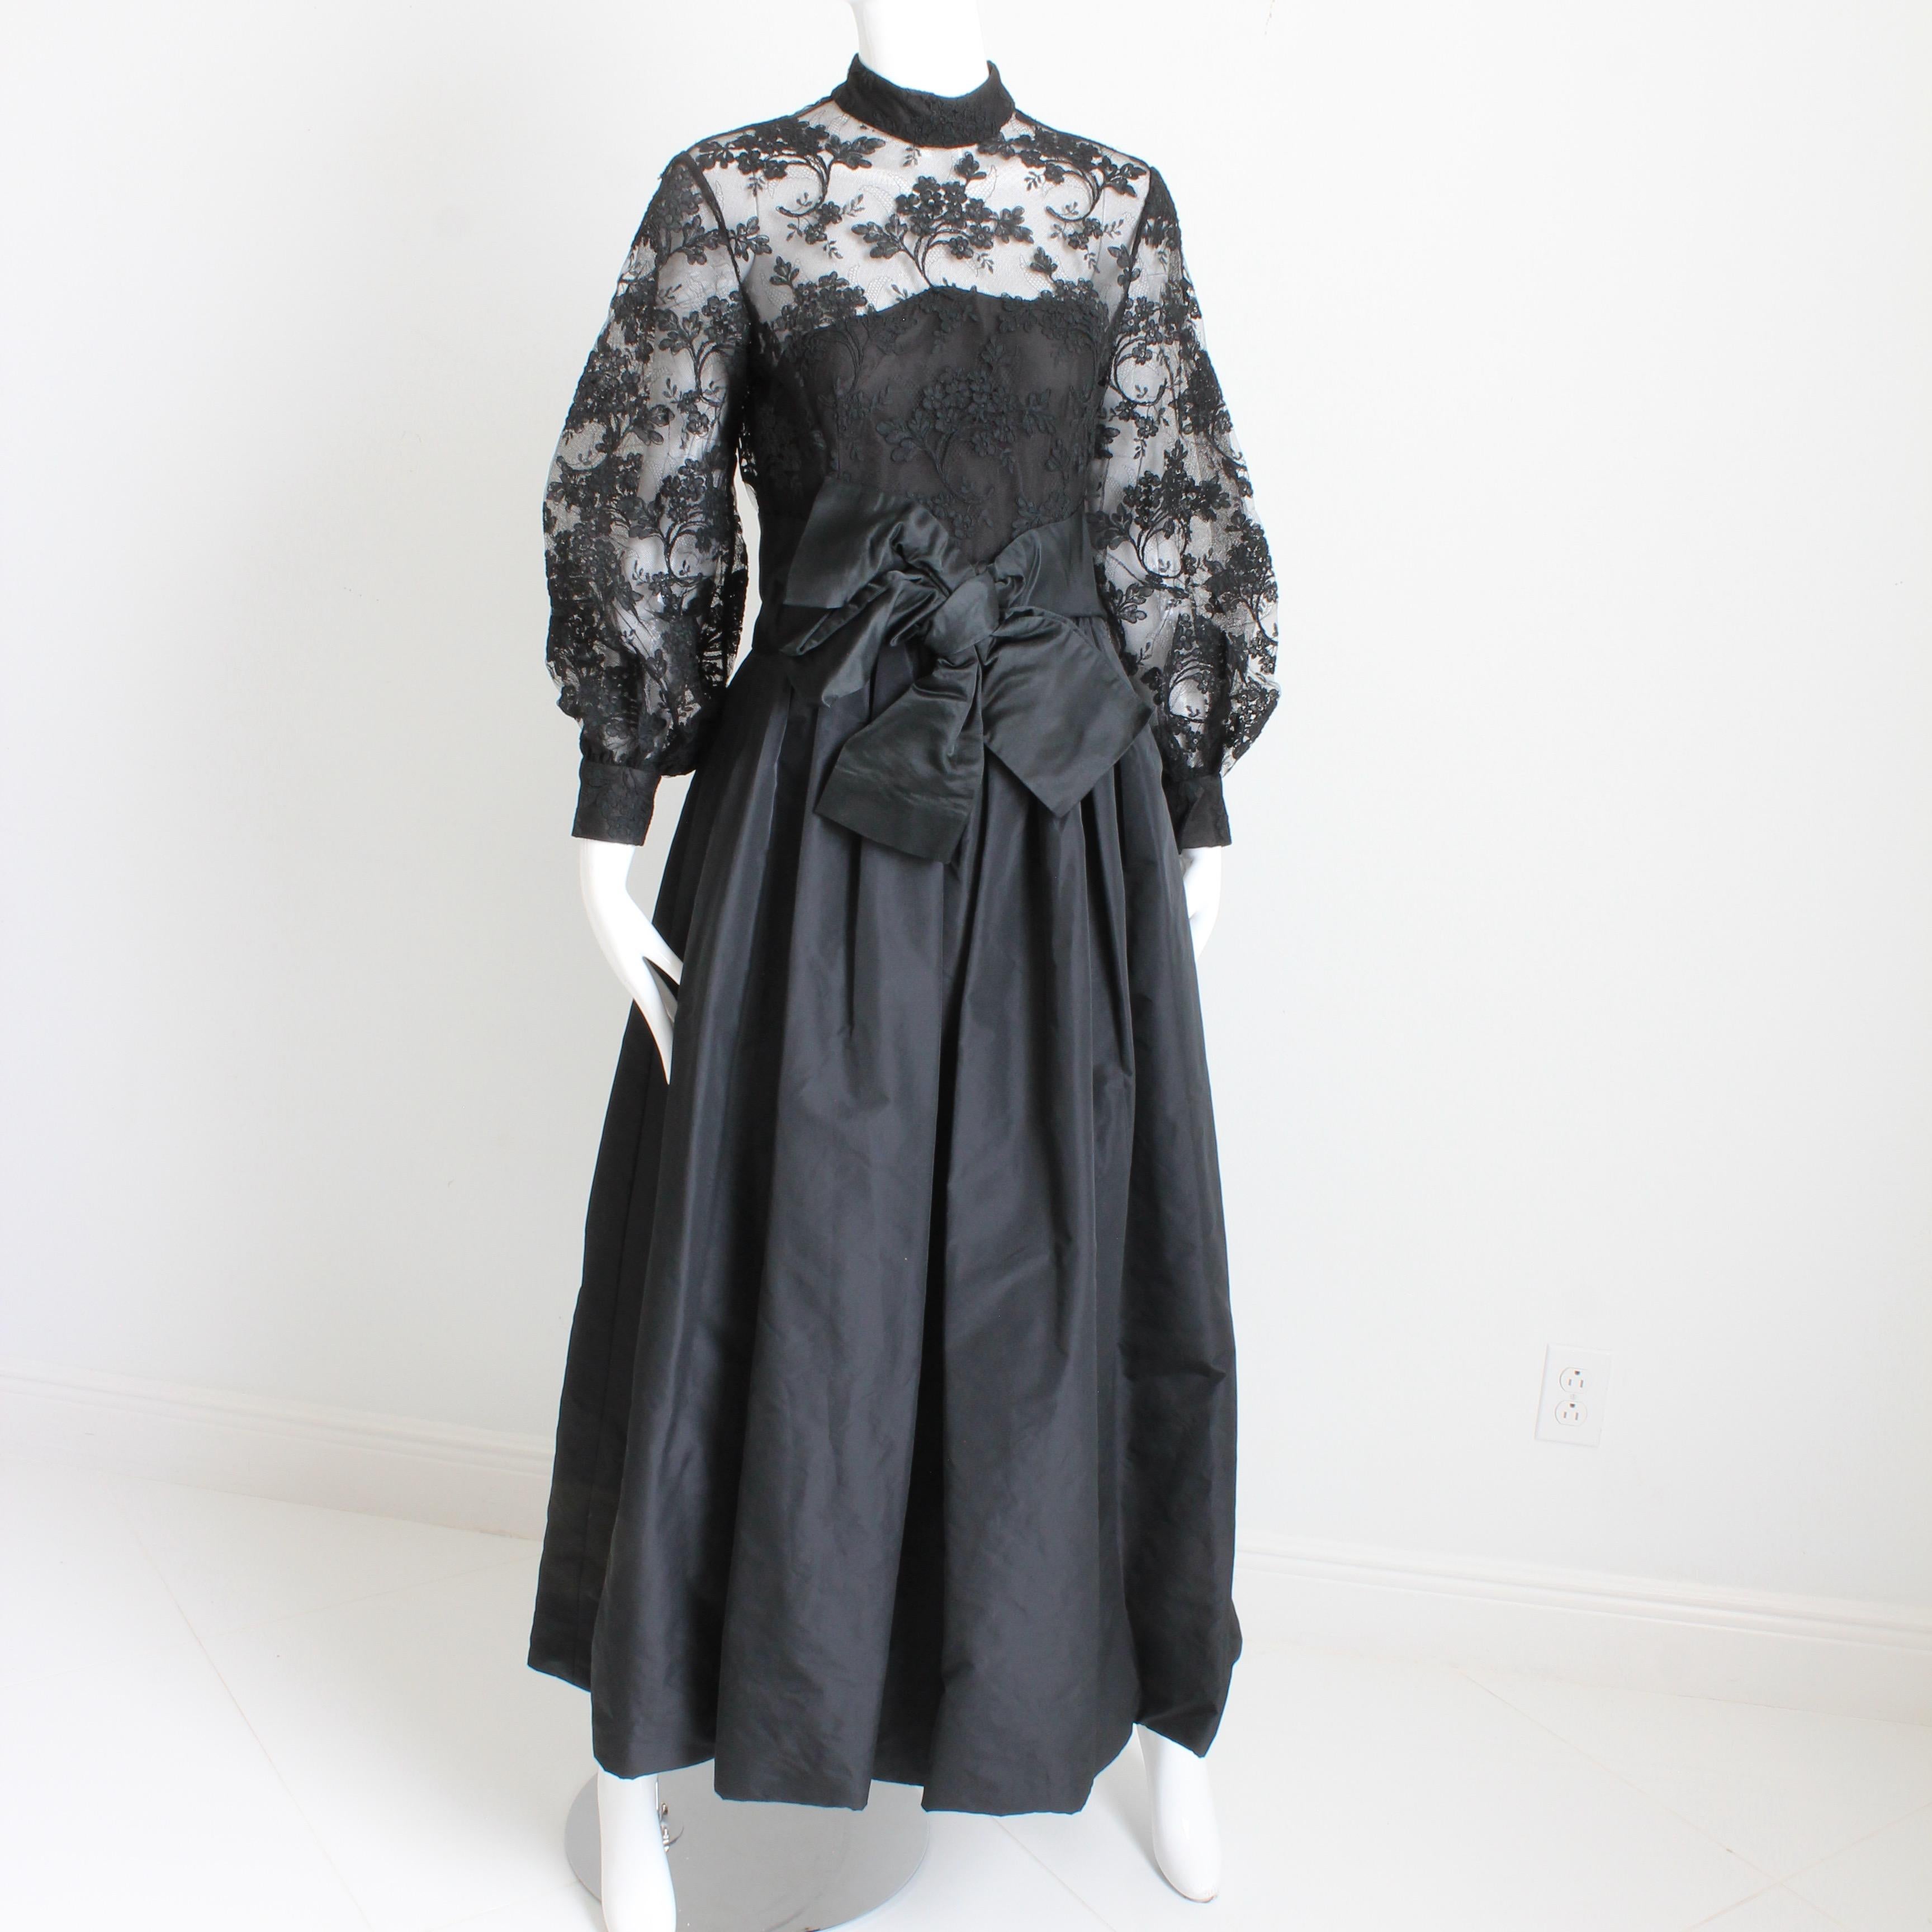 This black lace and taffeta evening gown was made by Ronald Amey in the 1970s and is absolutely gorgeous.  The bodice features black floral lace with netting underneath, and the the darted skirt is made from what appears to be a black silk taffeta